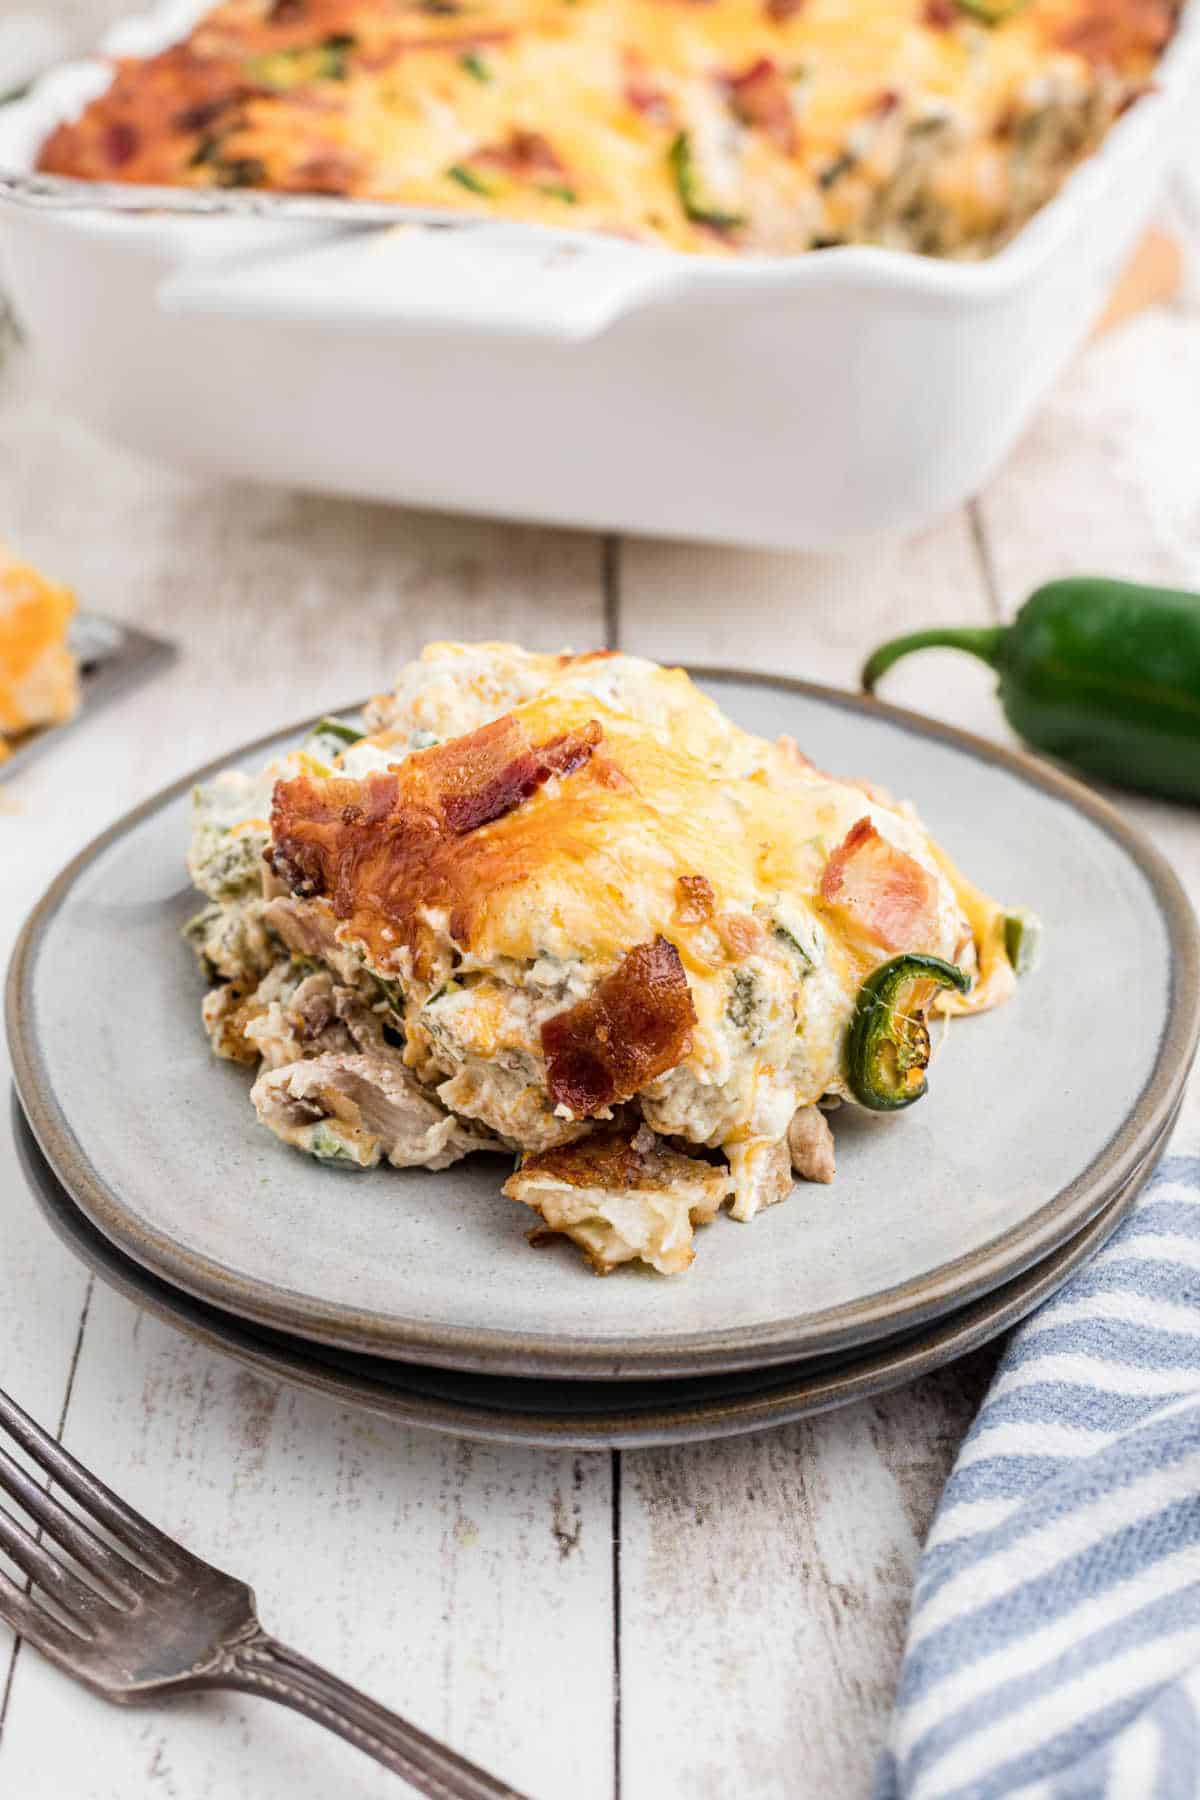 A dish full of Jalapeno Popper Tater Tot Casserole.